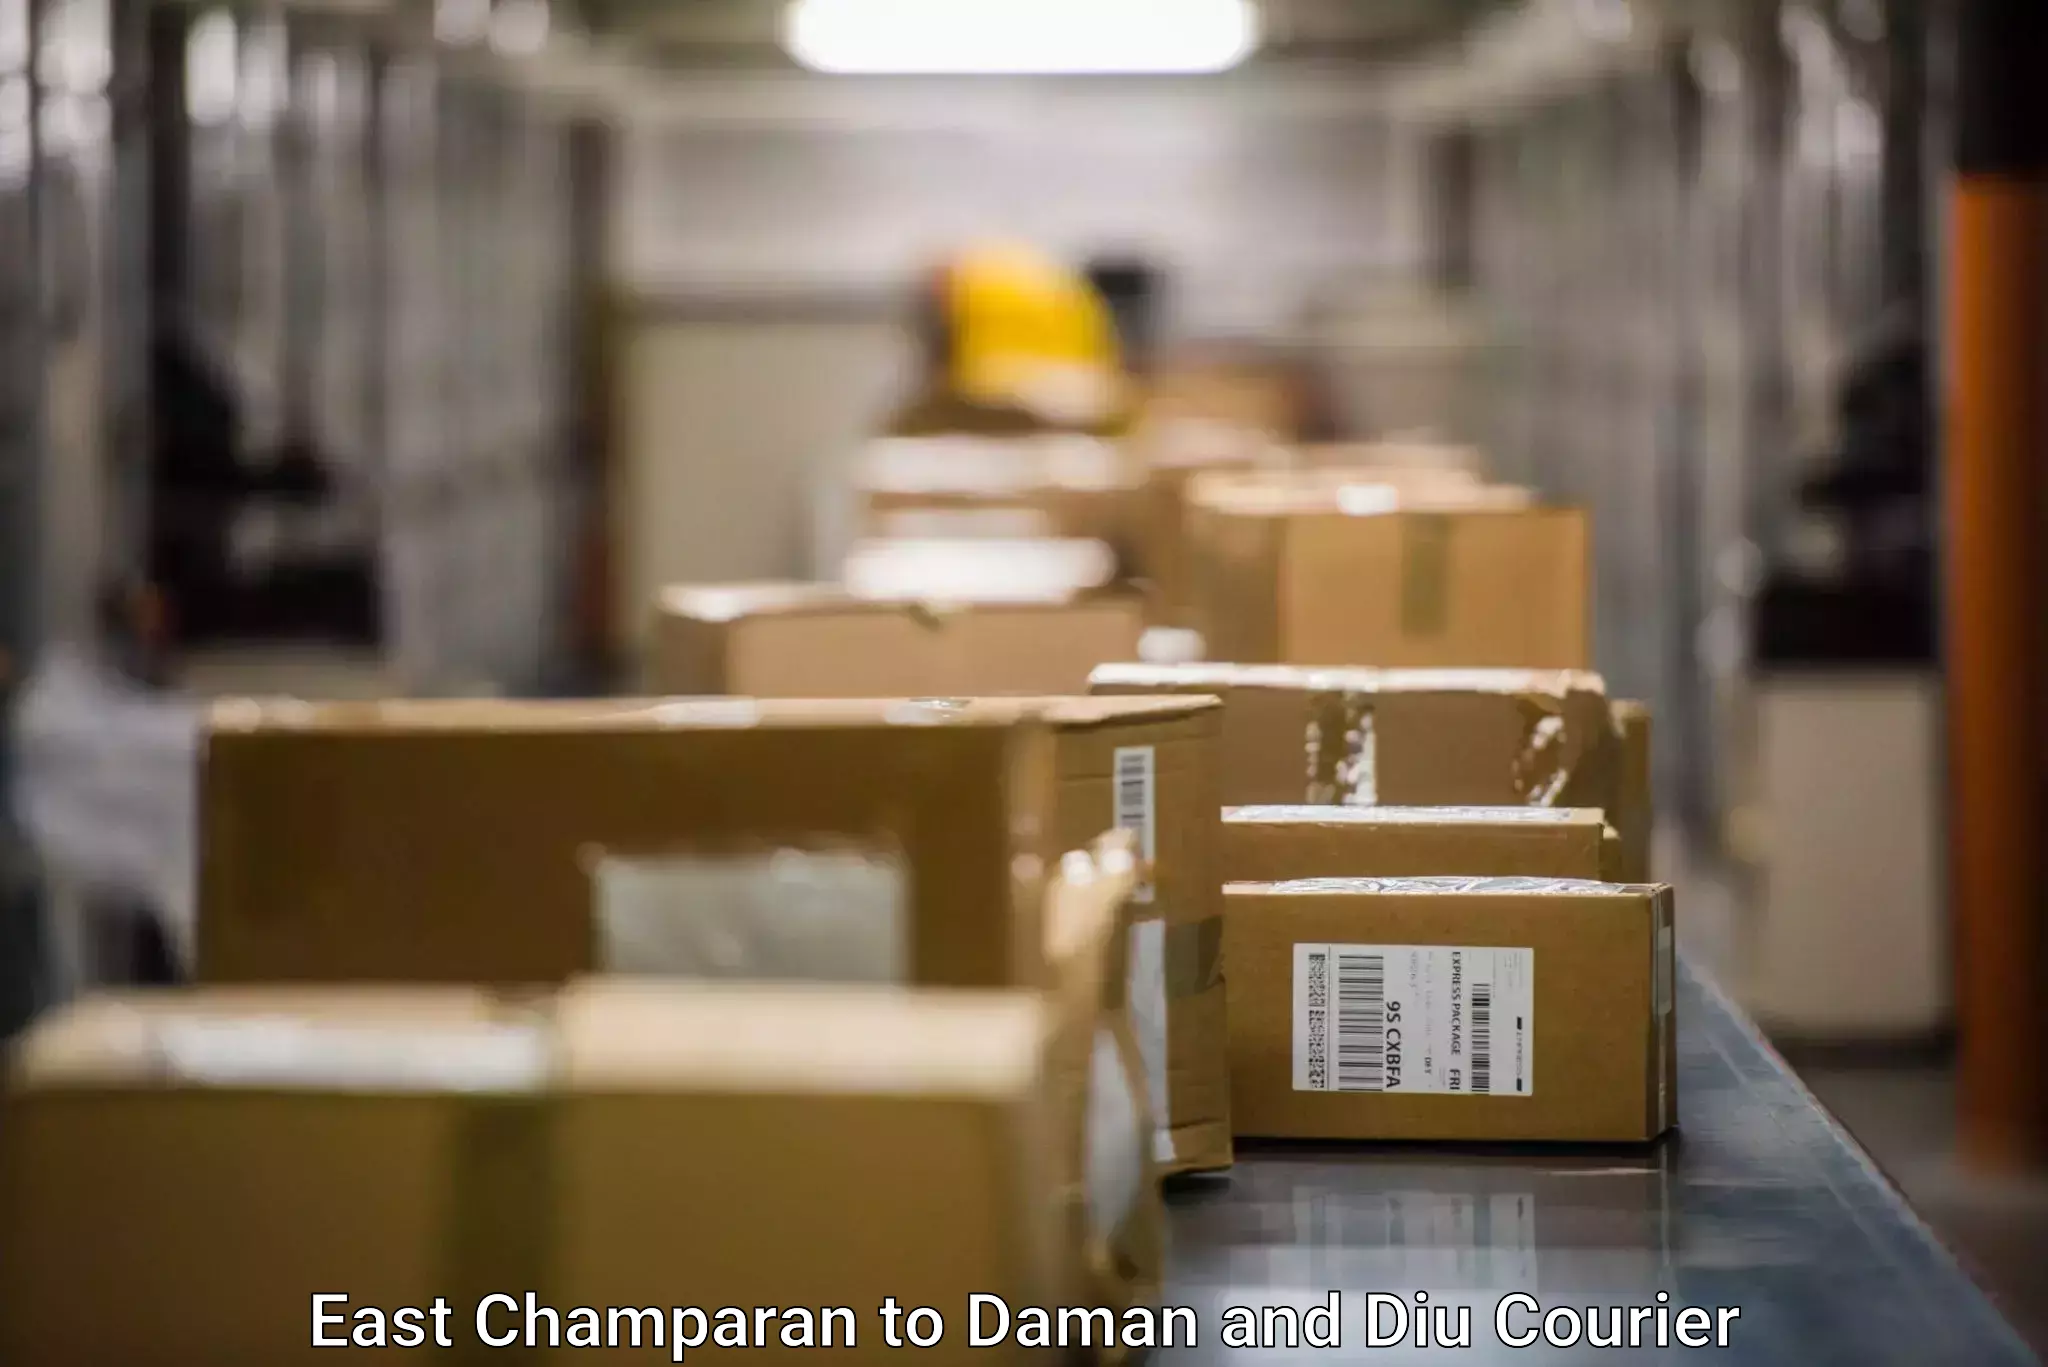 Courier service efficiency East Champaran to Daman